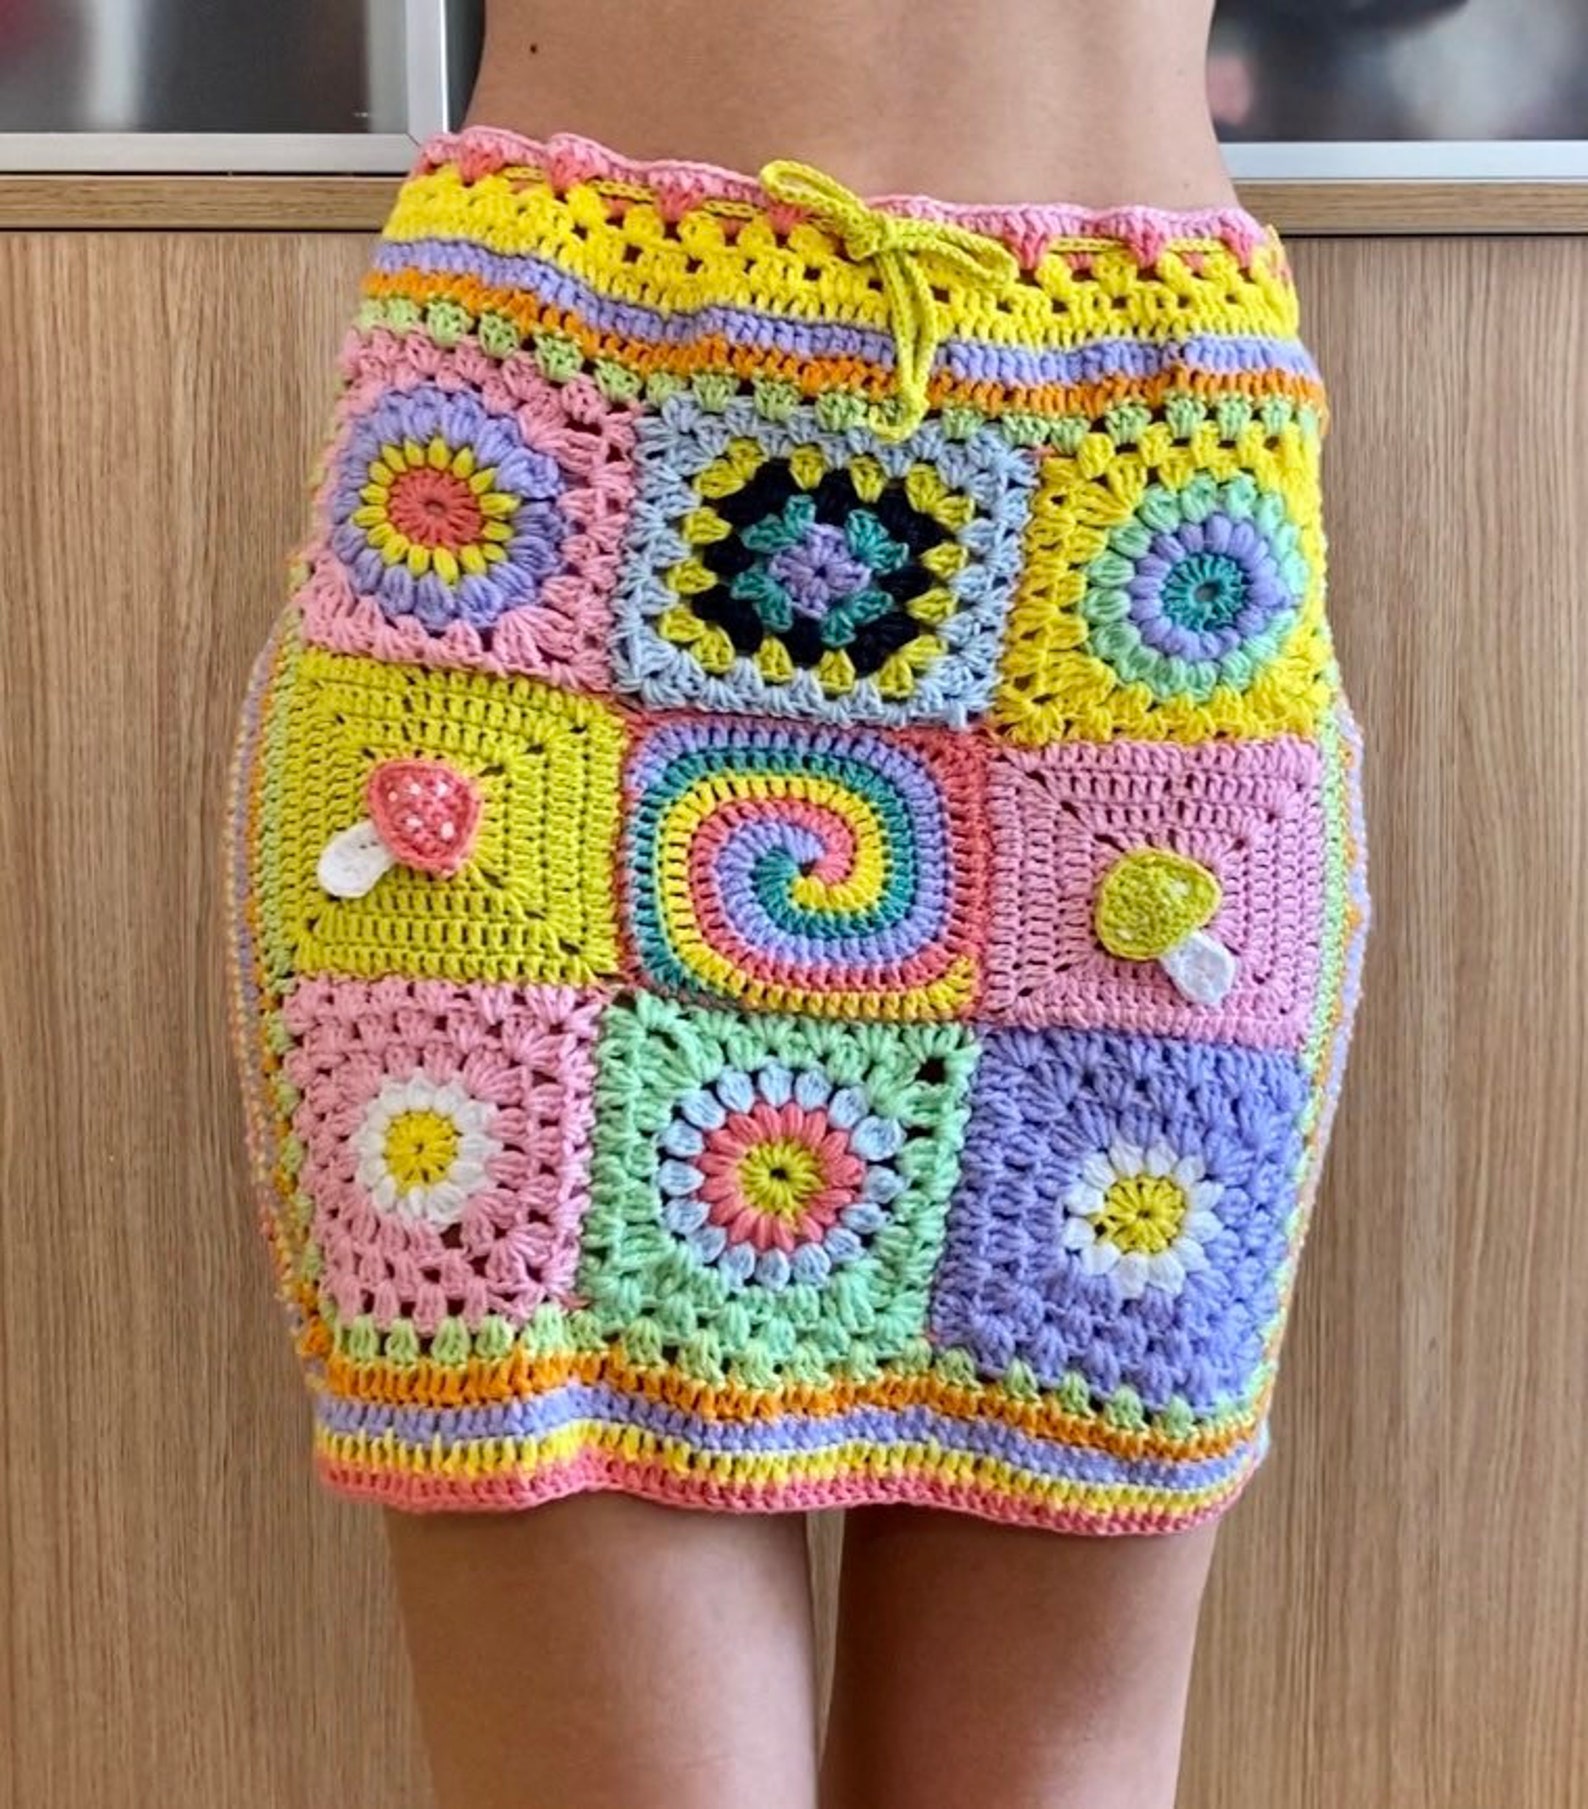 Patchwork Crochet Skirt Made With Granny Squares - Etsy